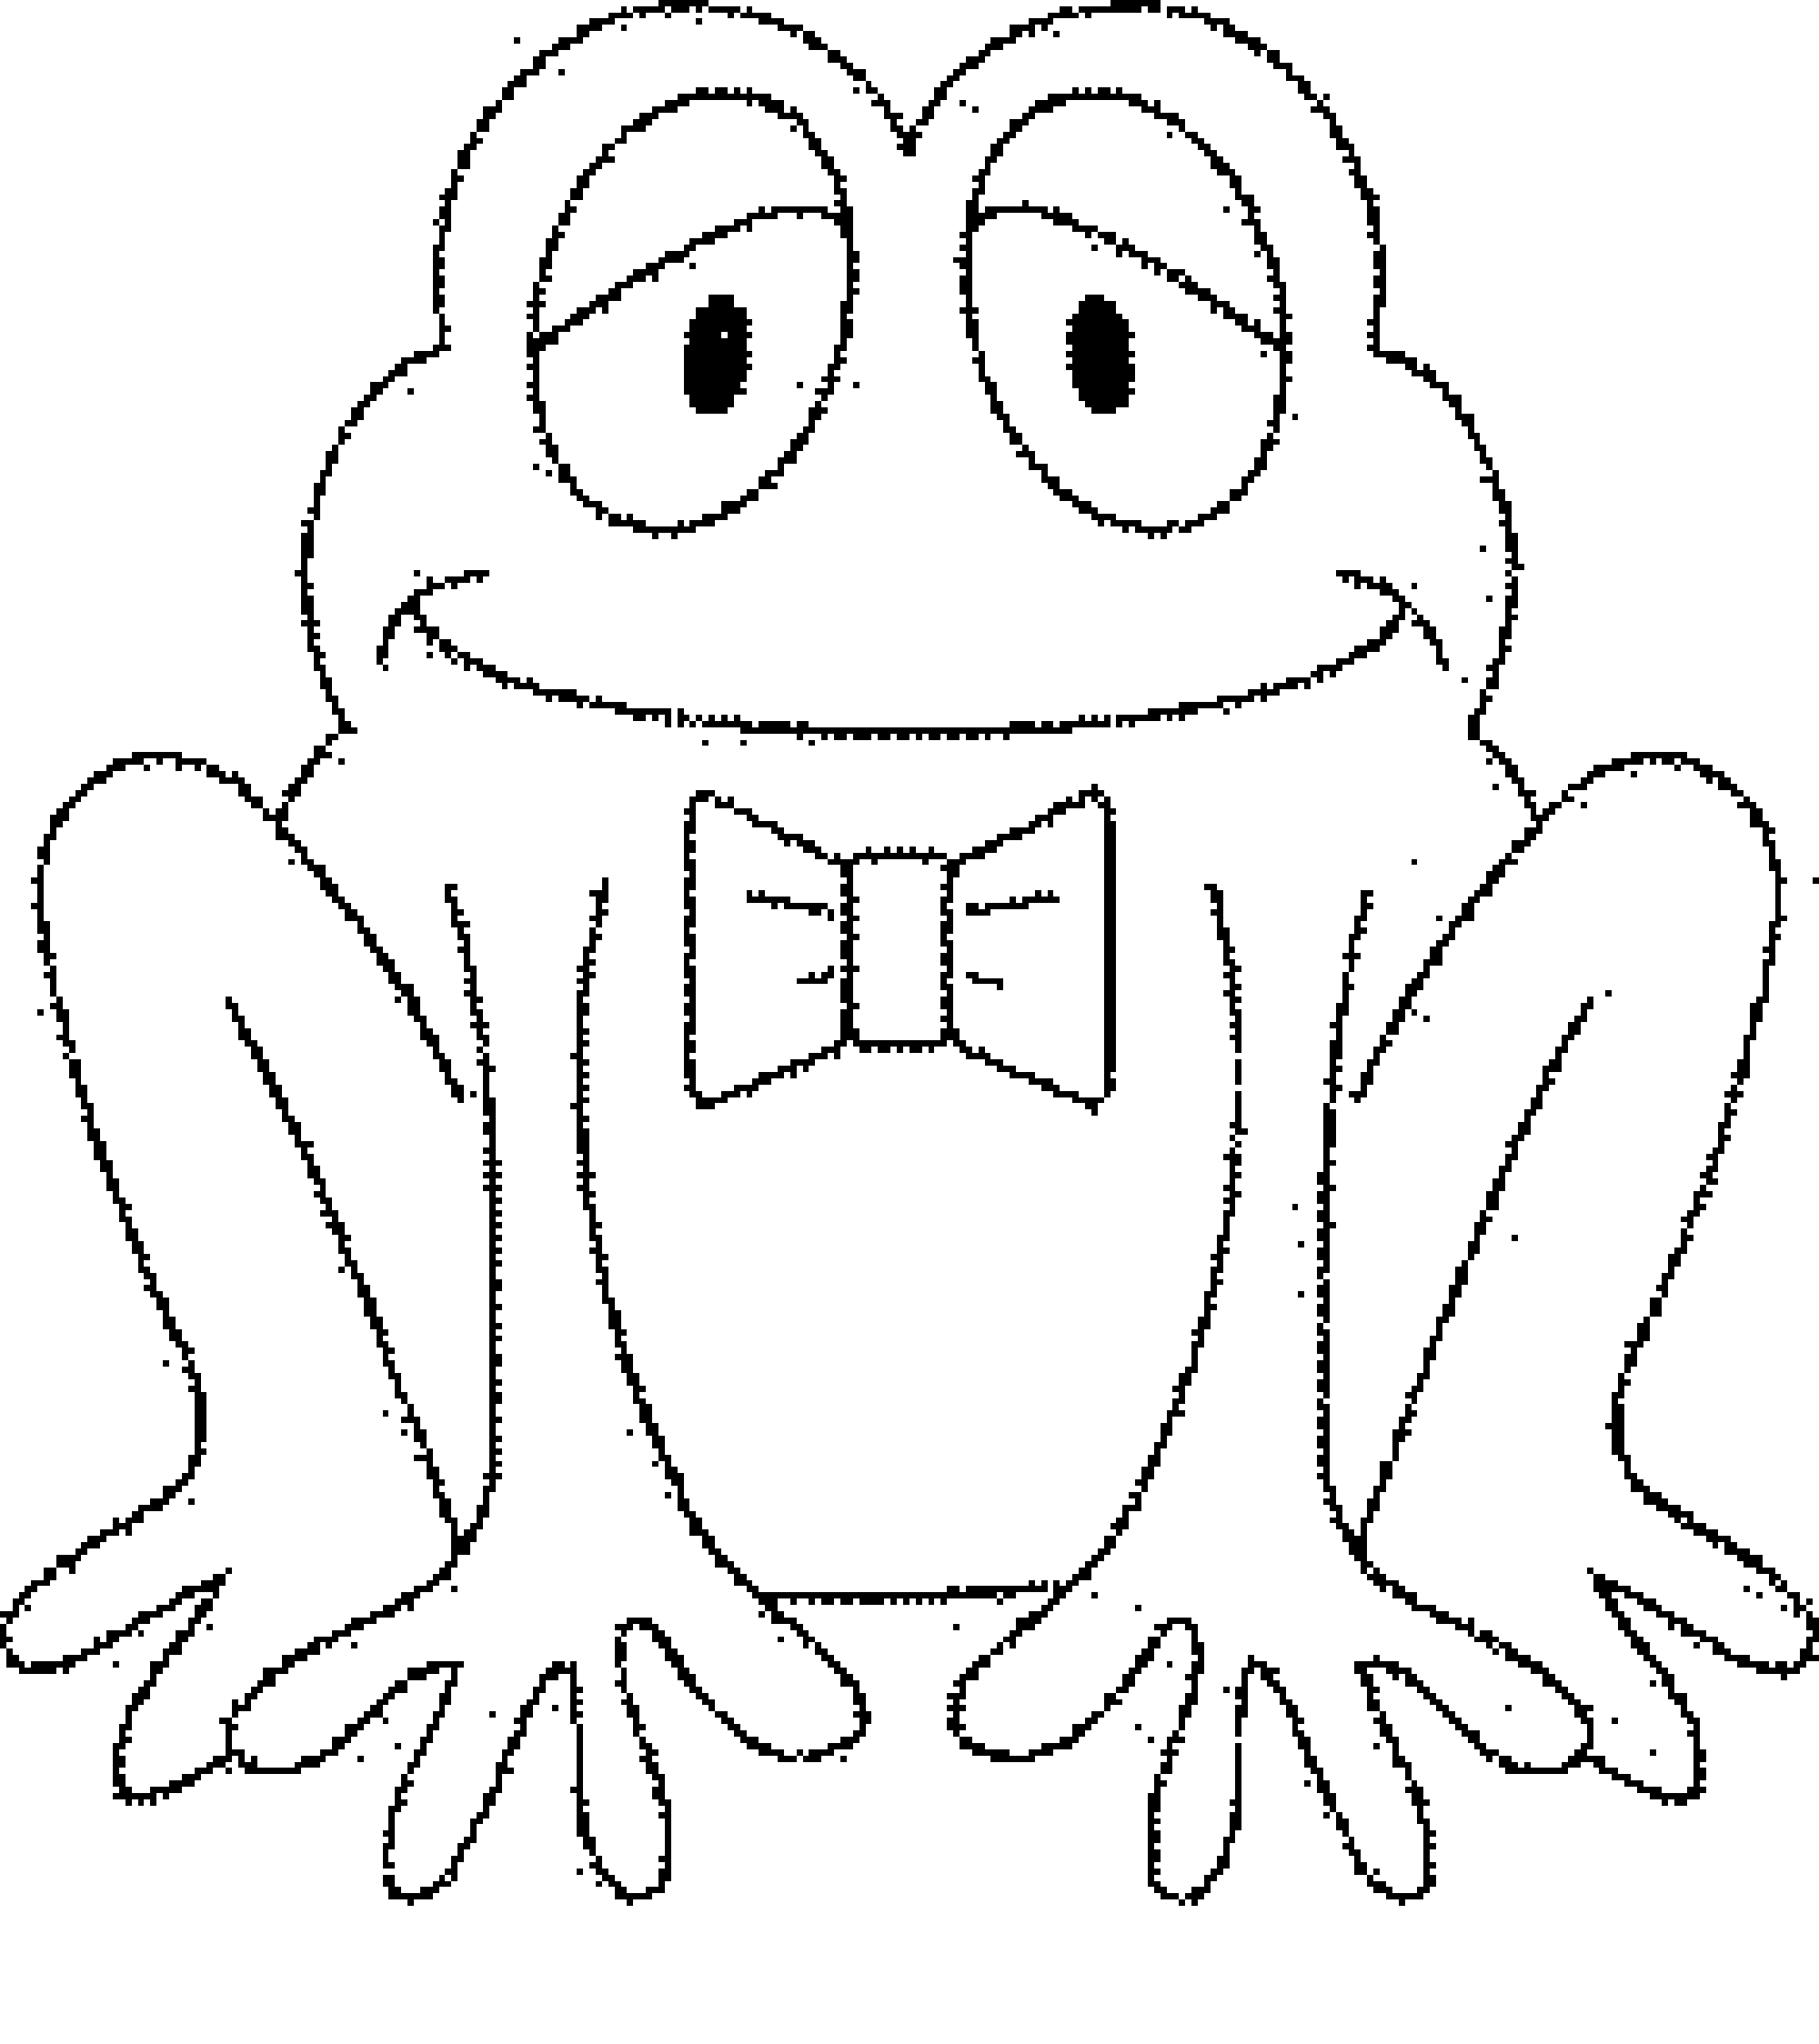 Print & Download - Frog Coloring Pages Theme for Kids